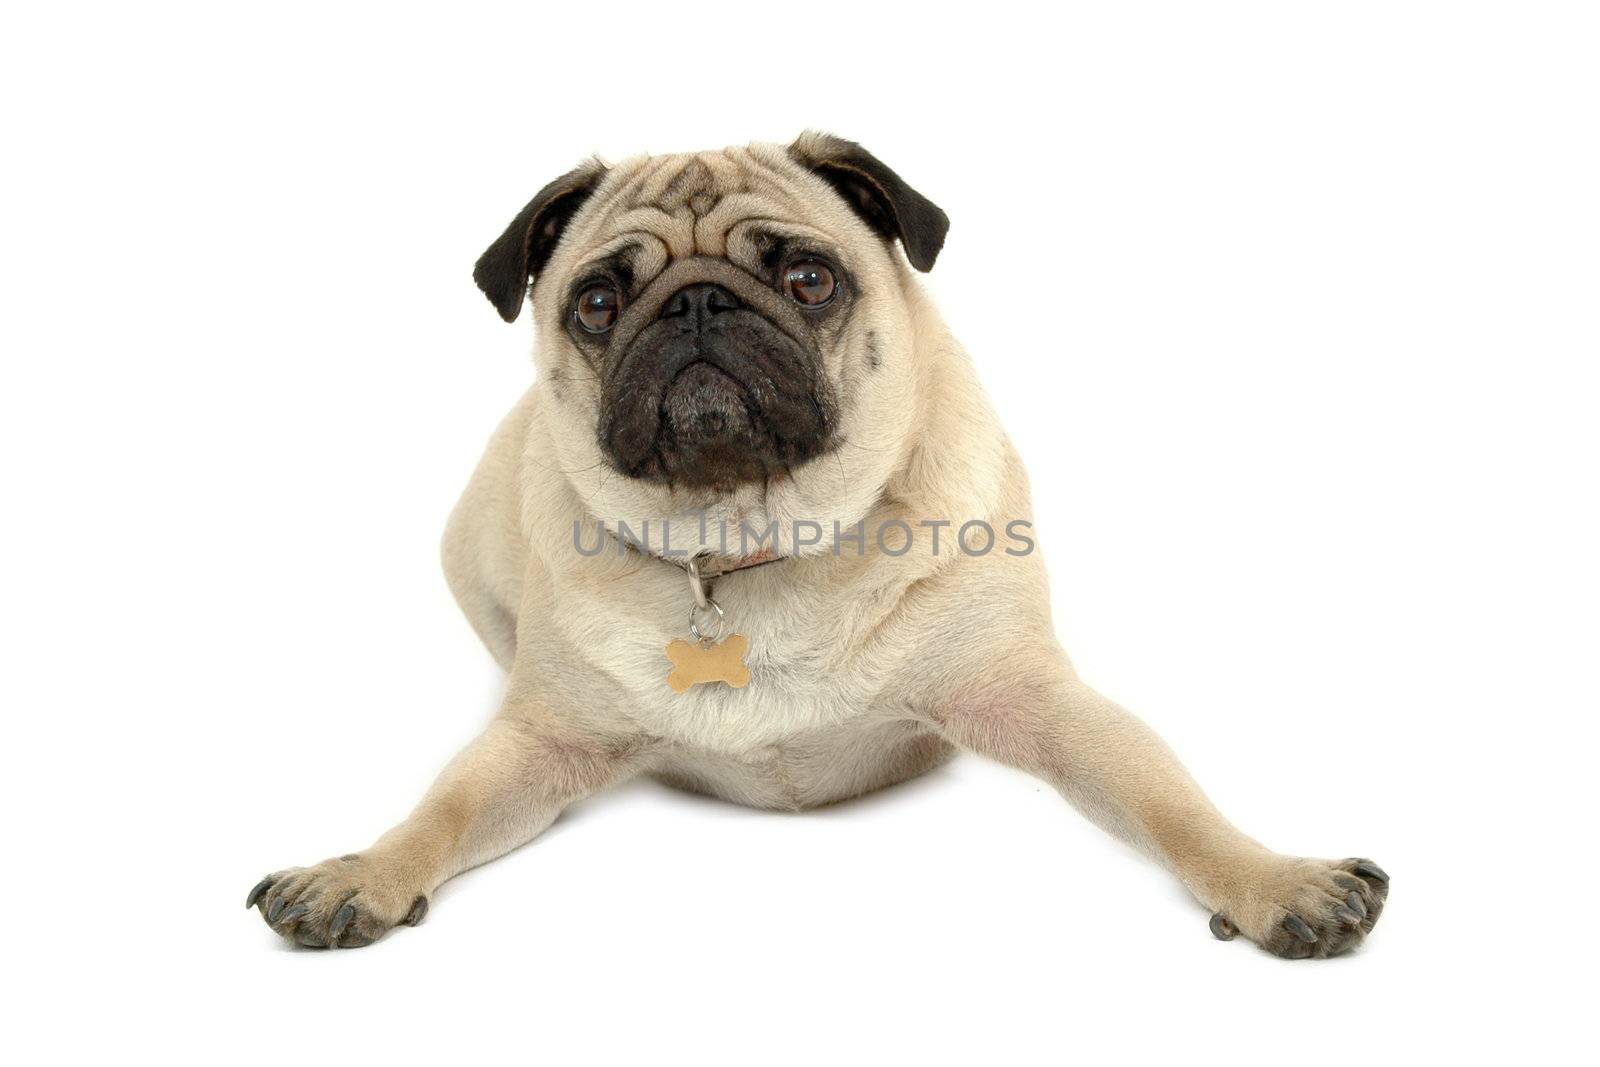 A sad pug is resting on white background